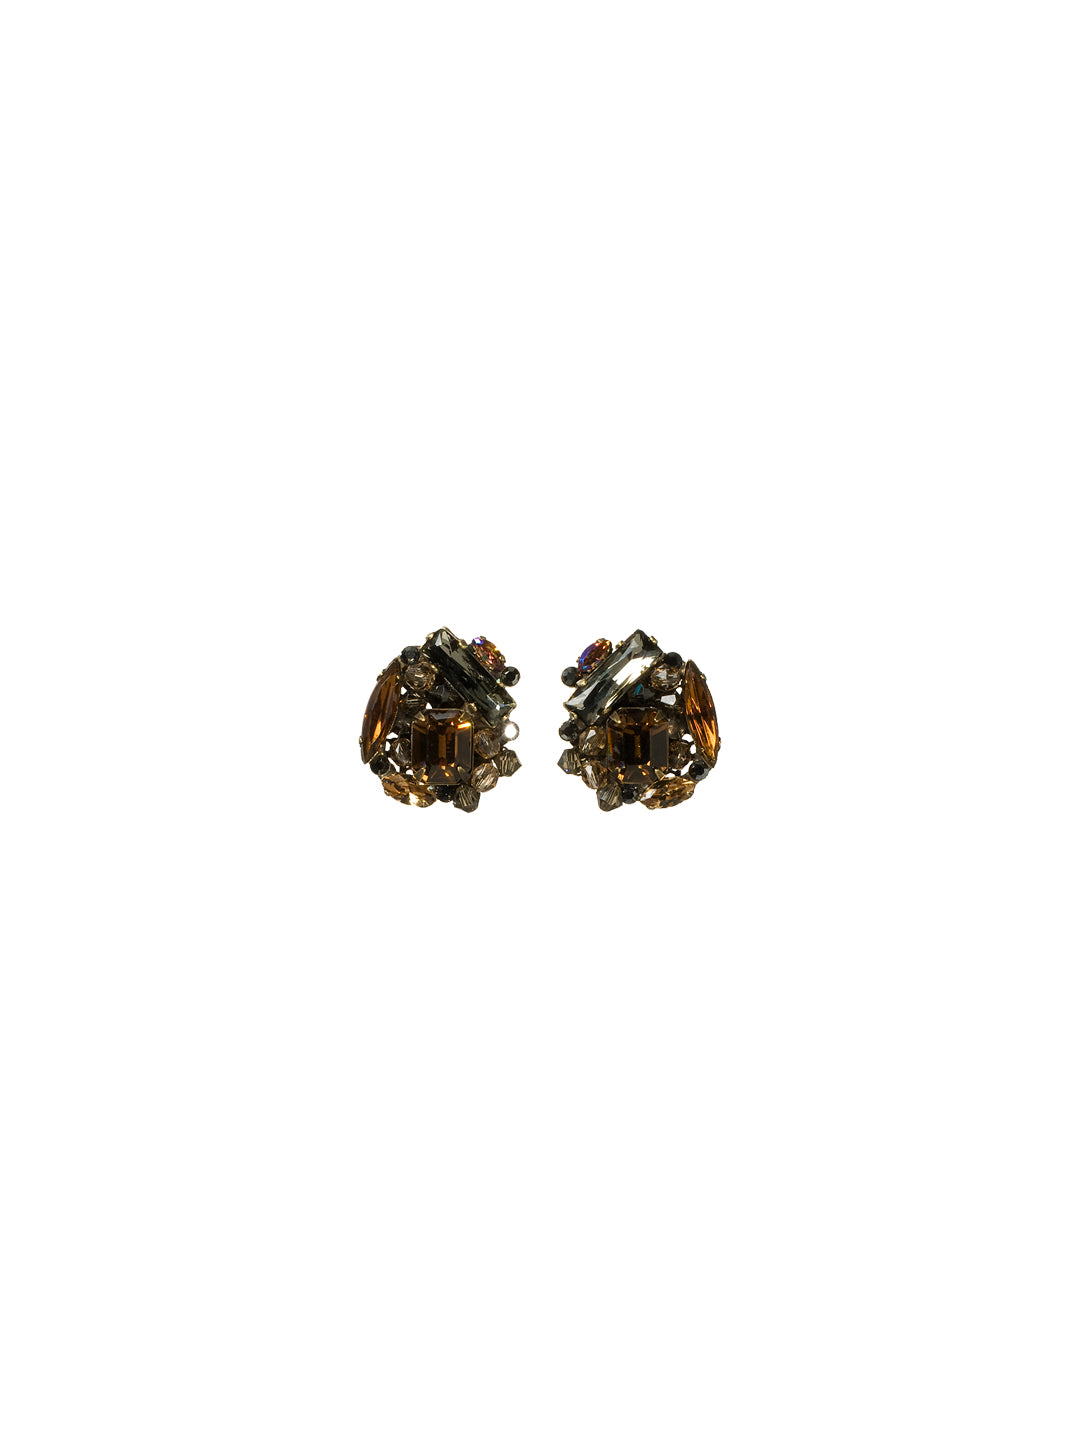 Oversized Crystal Cluster Earring Stud Earrings - ECE14AGCN - A classic Sorrelli style to make a statement or wear everyday. From Sorrelli's City Neutral collection in our Antique Gold-tone finish.